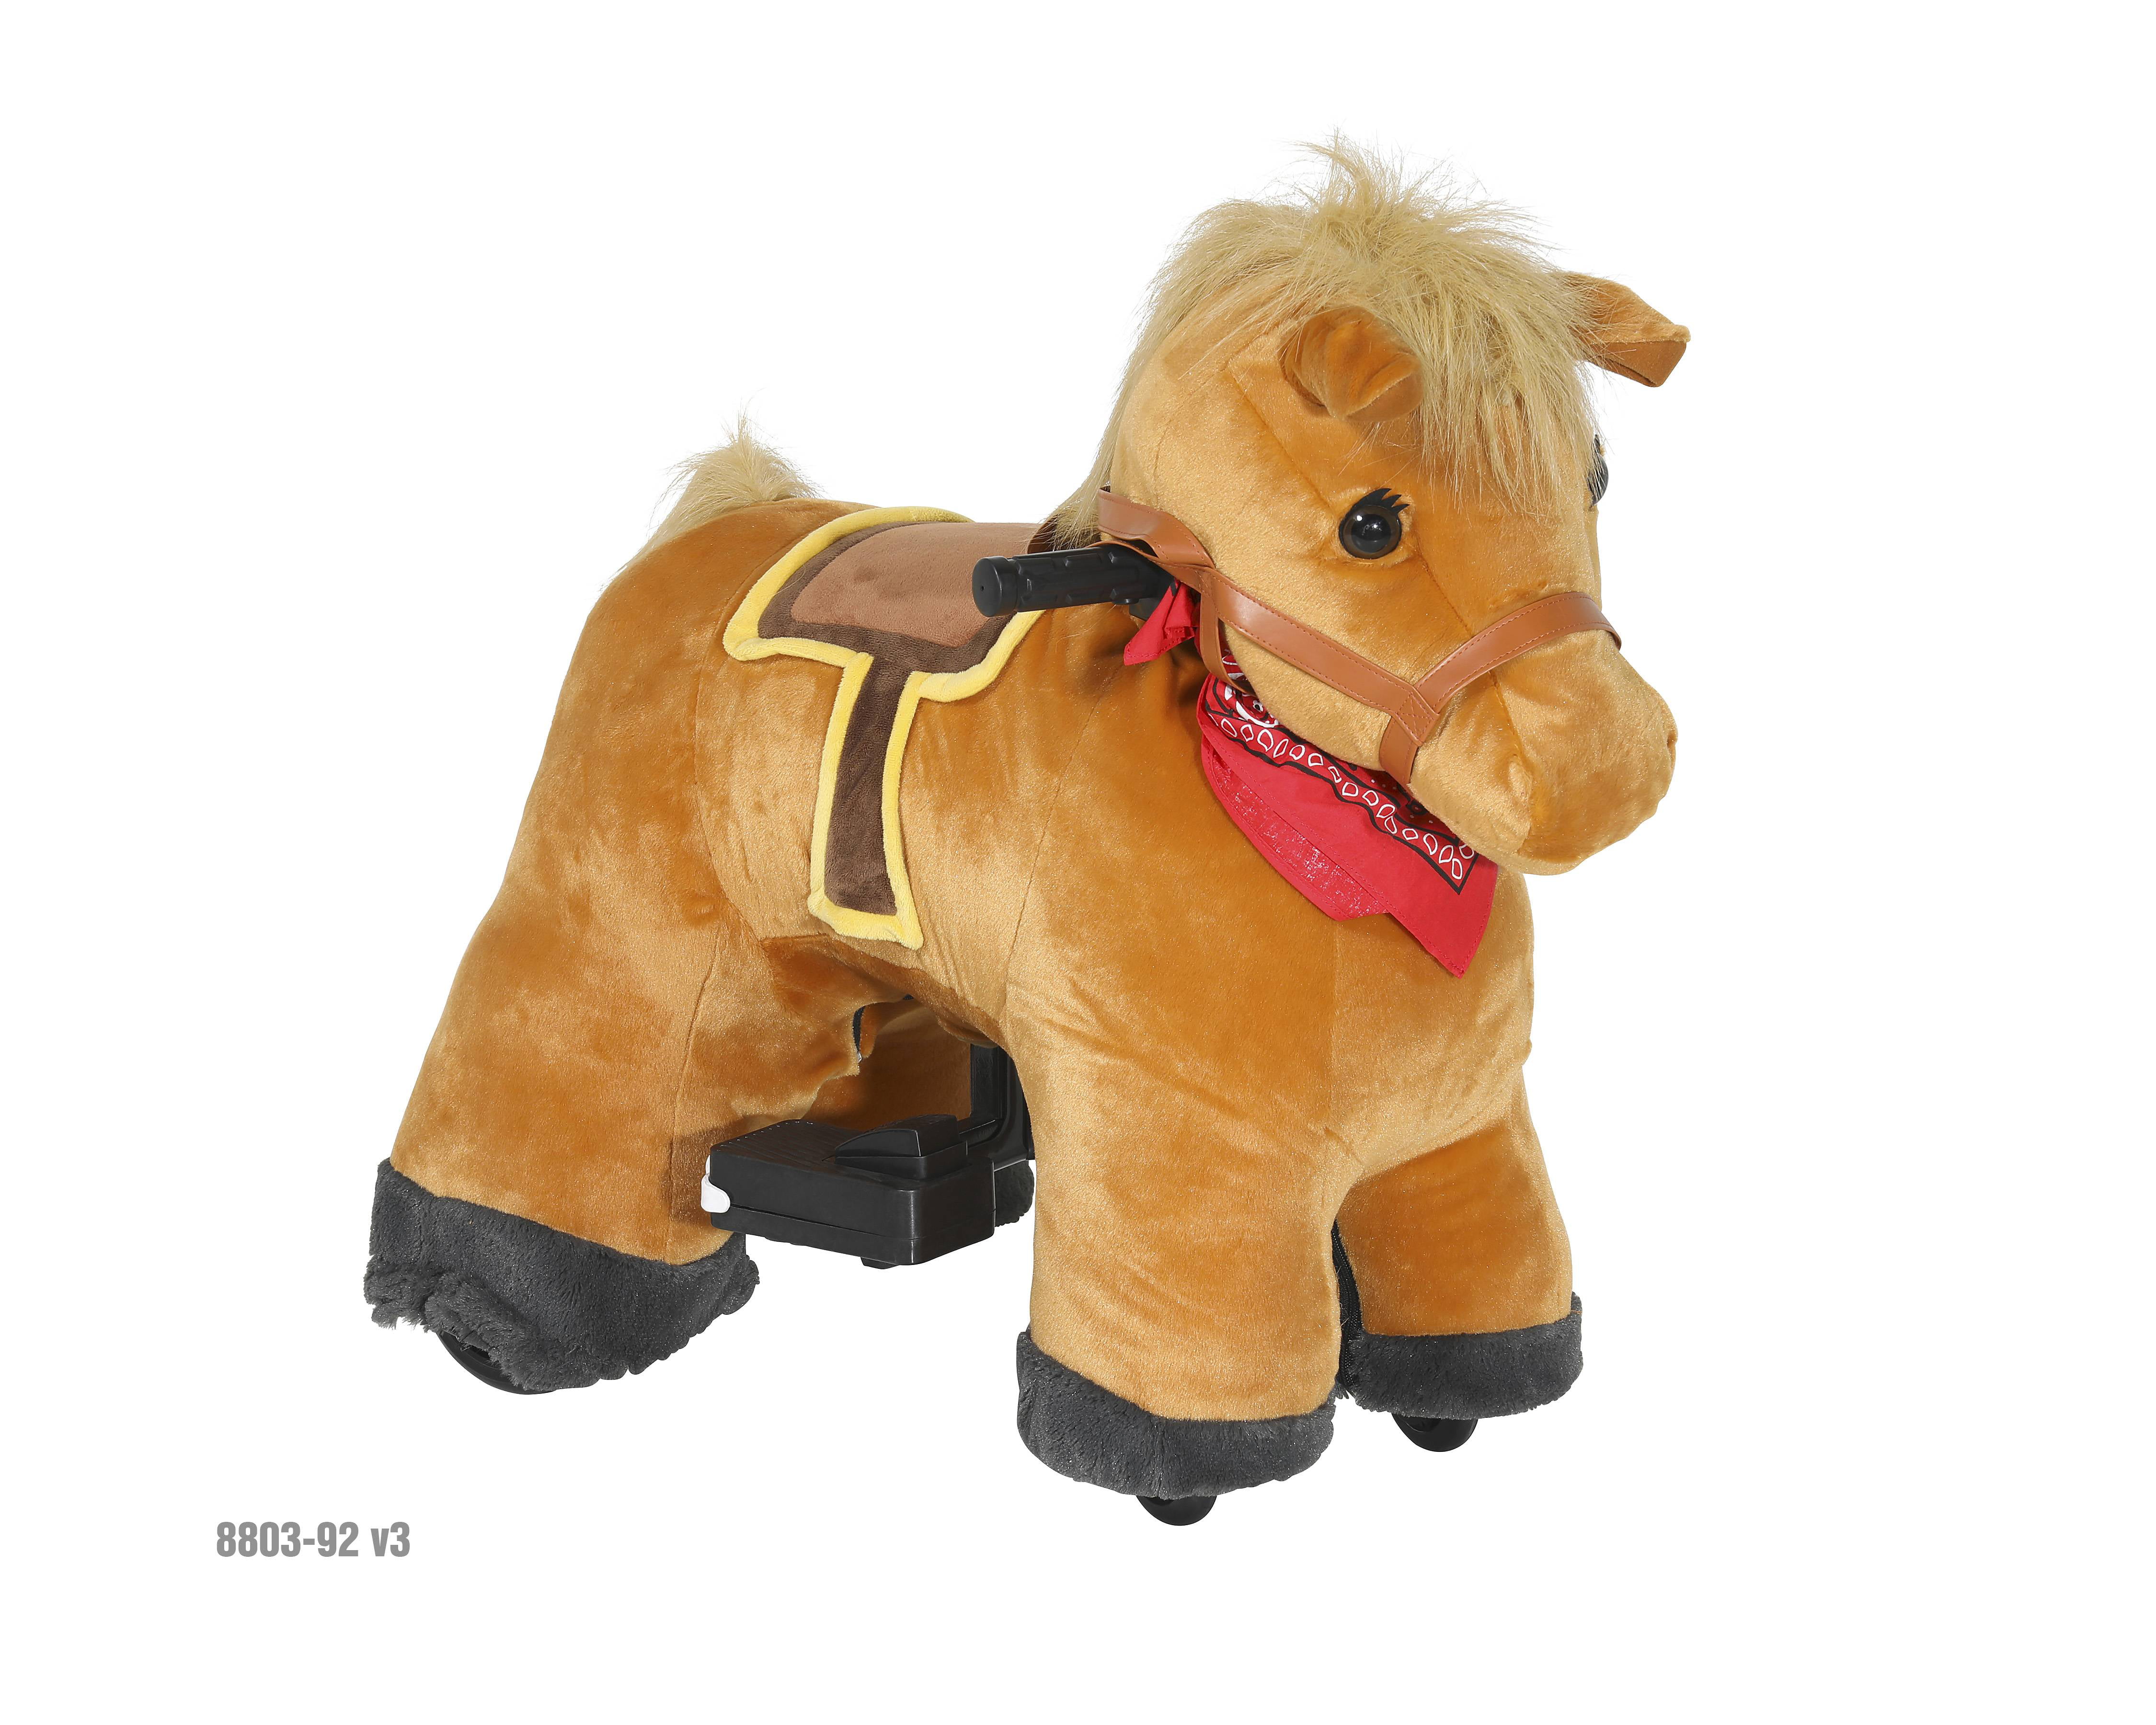 life size toy horse that walks